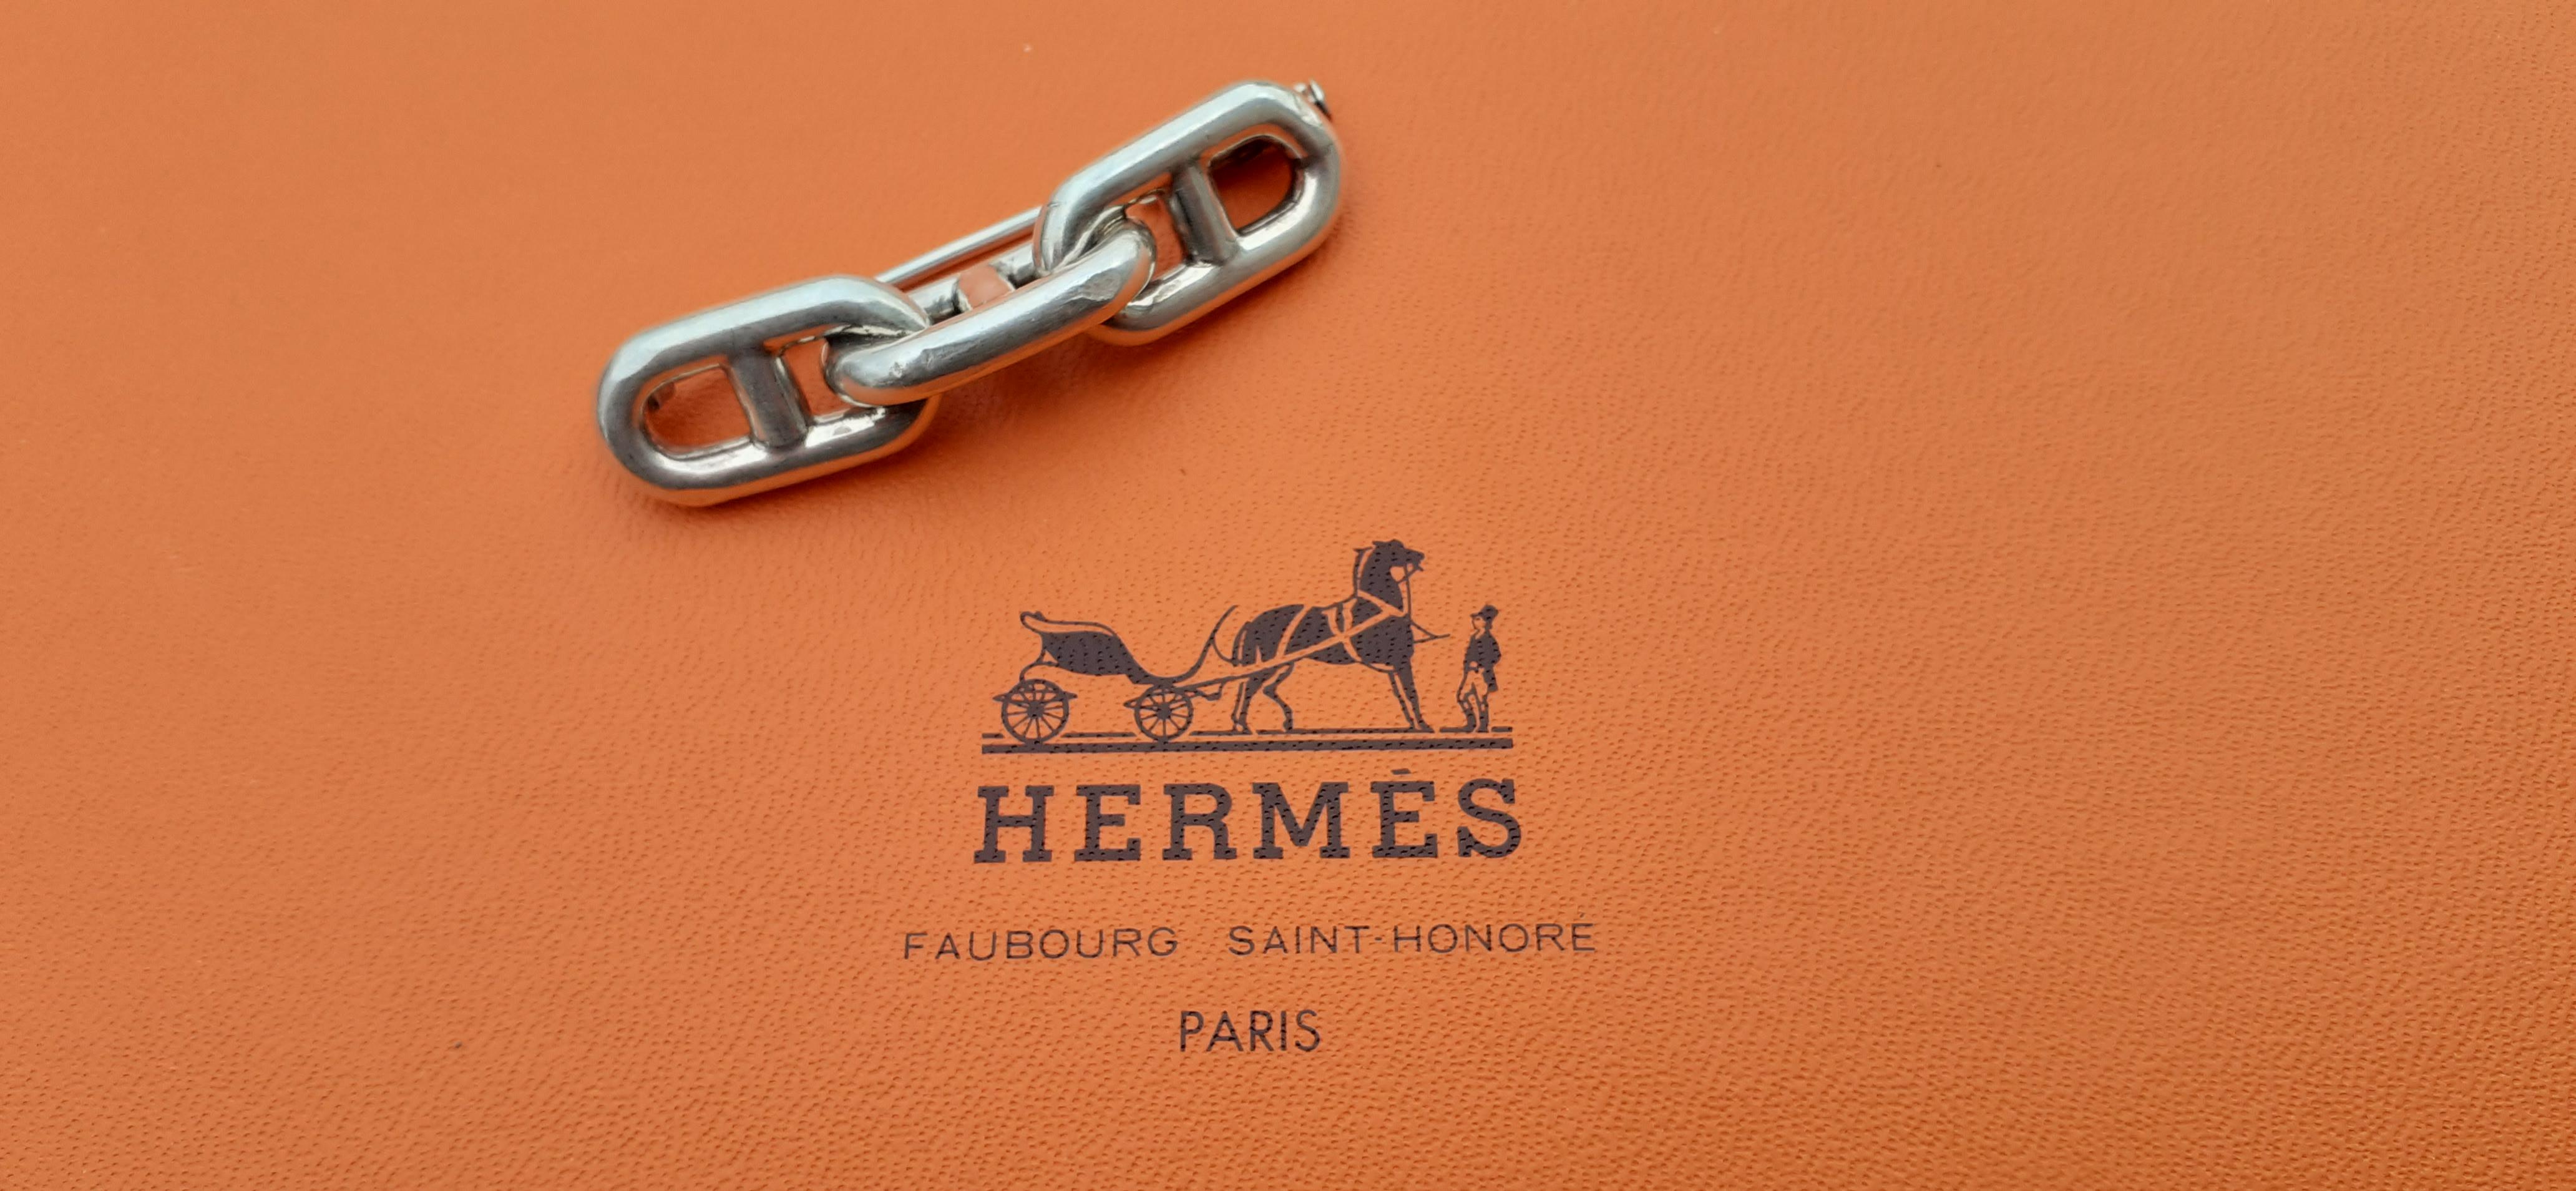 Rare and Beautiful Authentic Hermès Brooch

Pattern: 3 maillons Chaine d'Ancre (3 anchor chain links)

Made of Silver (at least 80%) 

Vintage Item 

